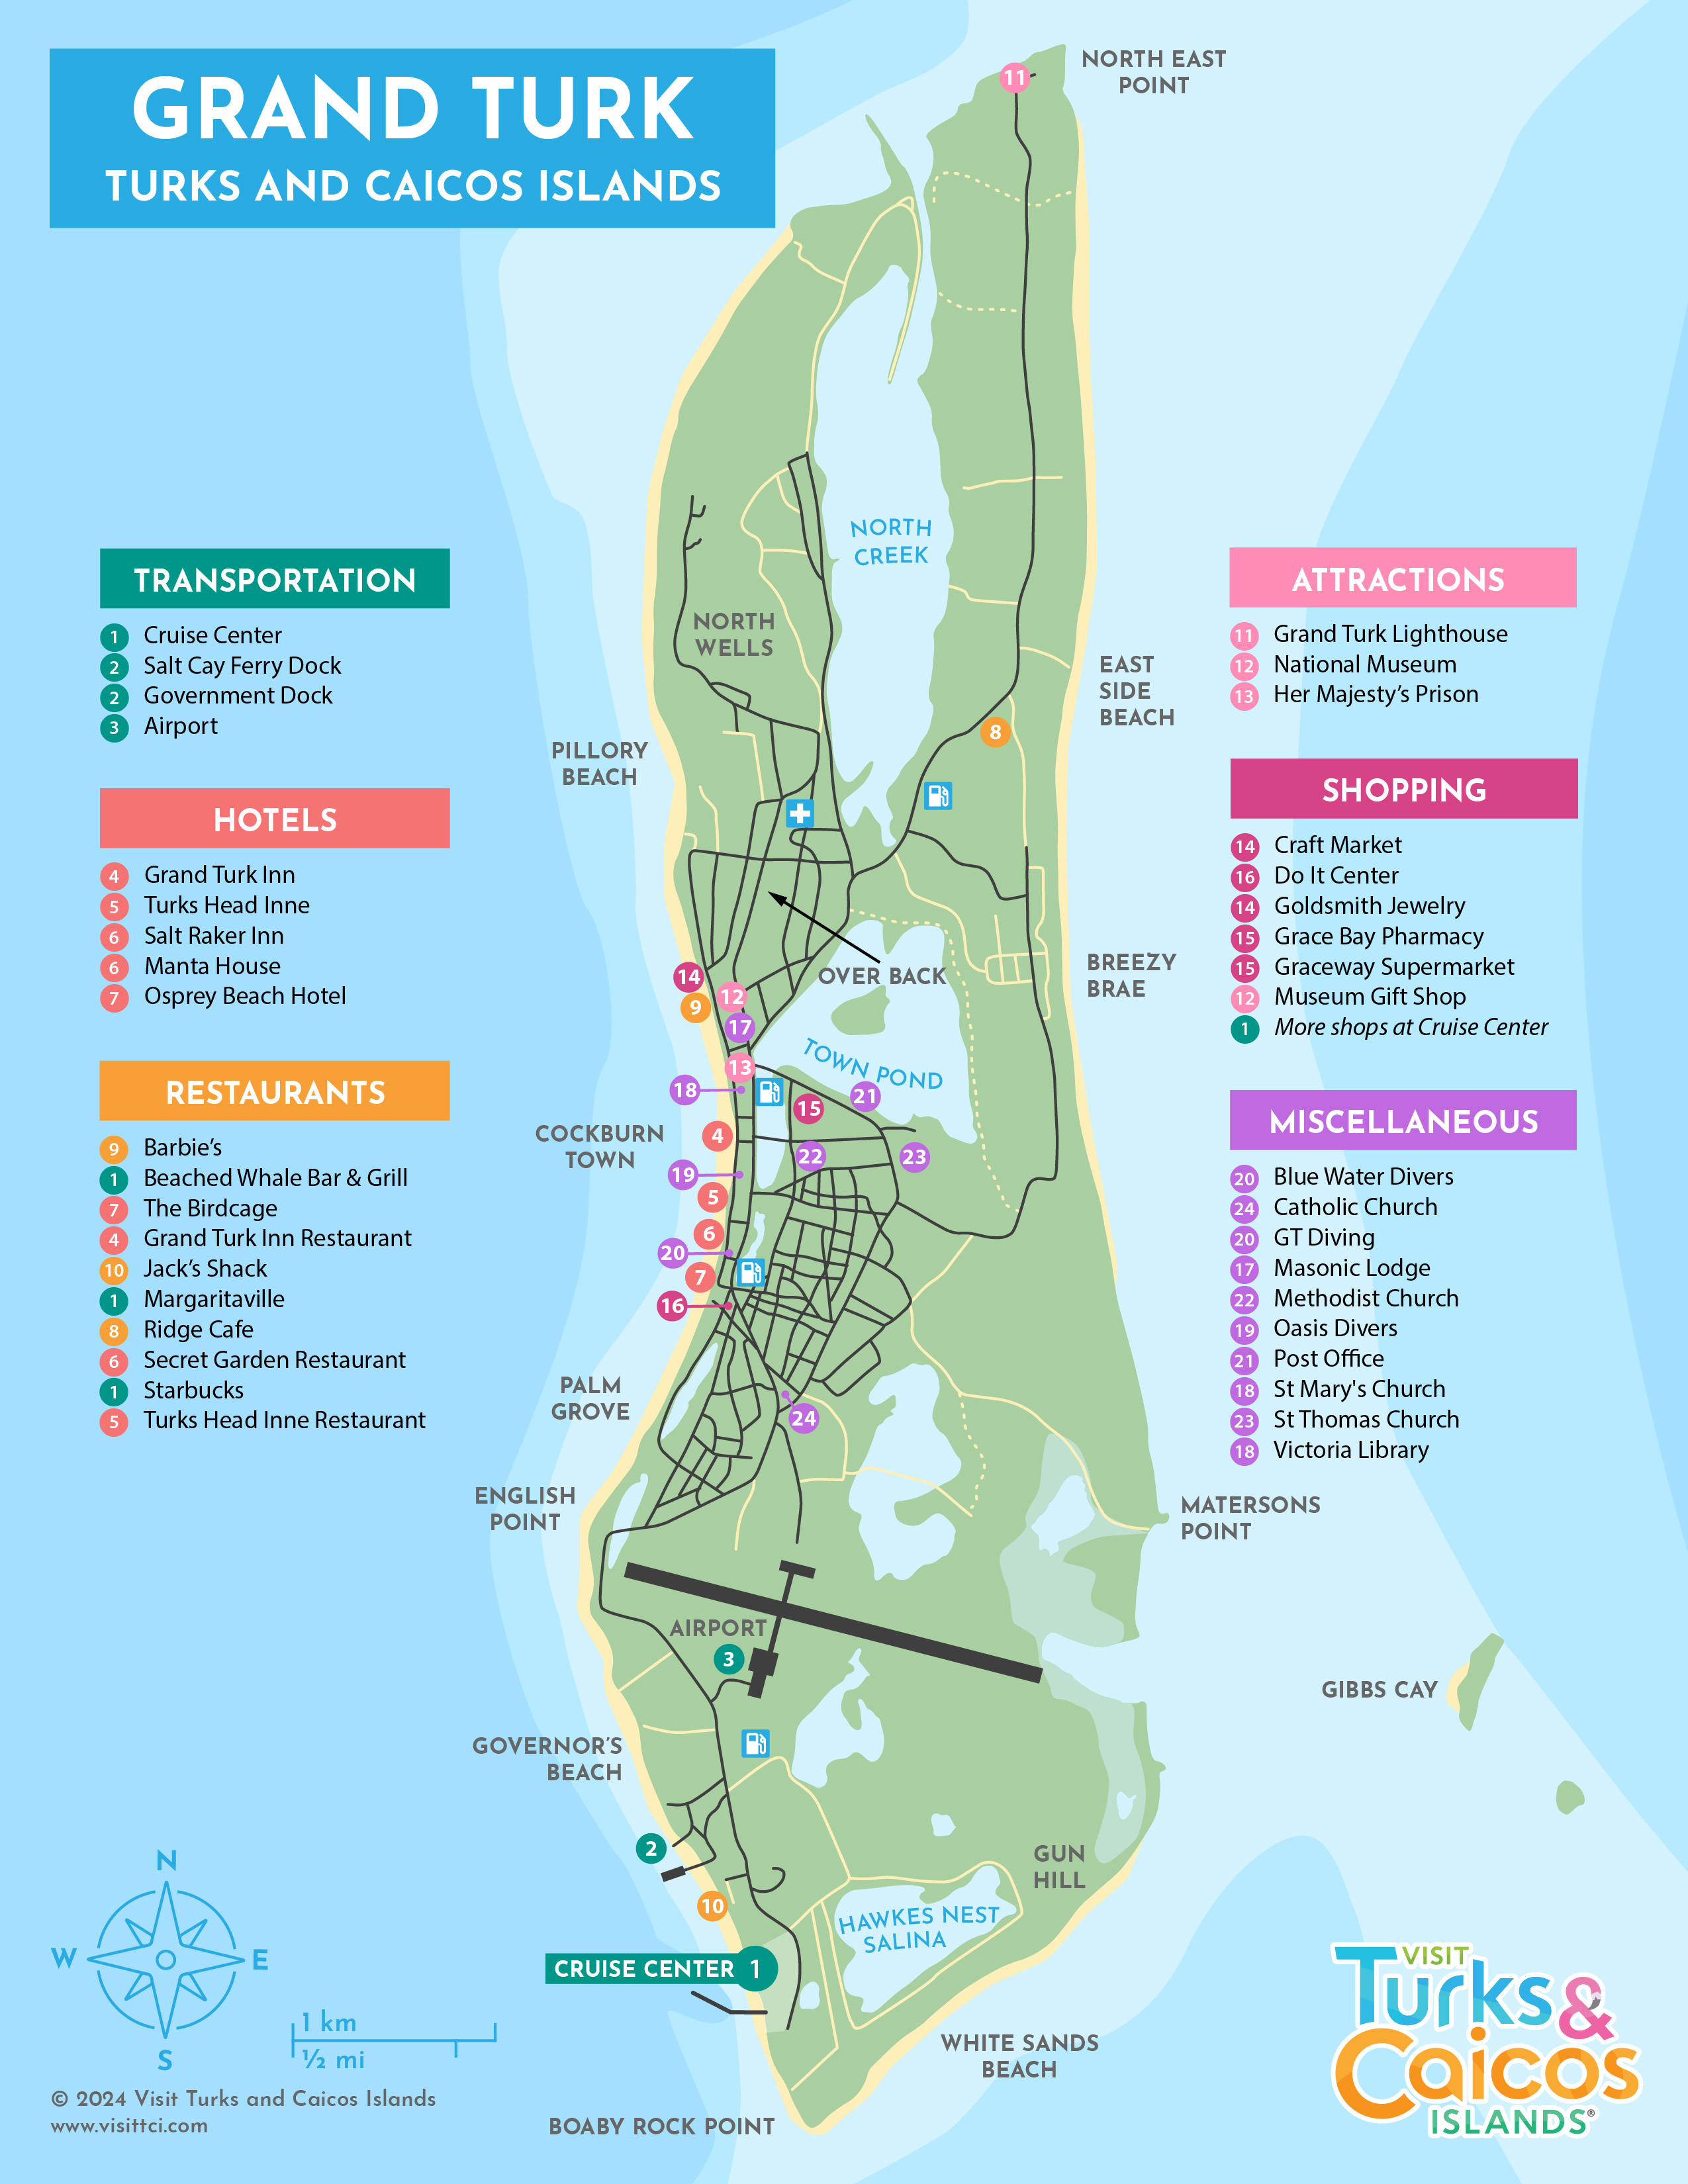 Grand Turk Caicos Islands Map Maps of Grand Turk | Visit Turks and Caicos Islands